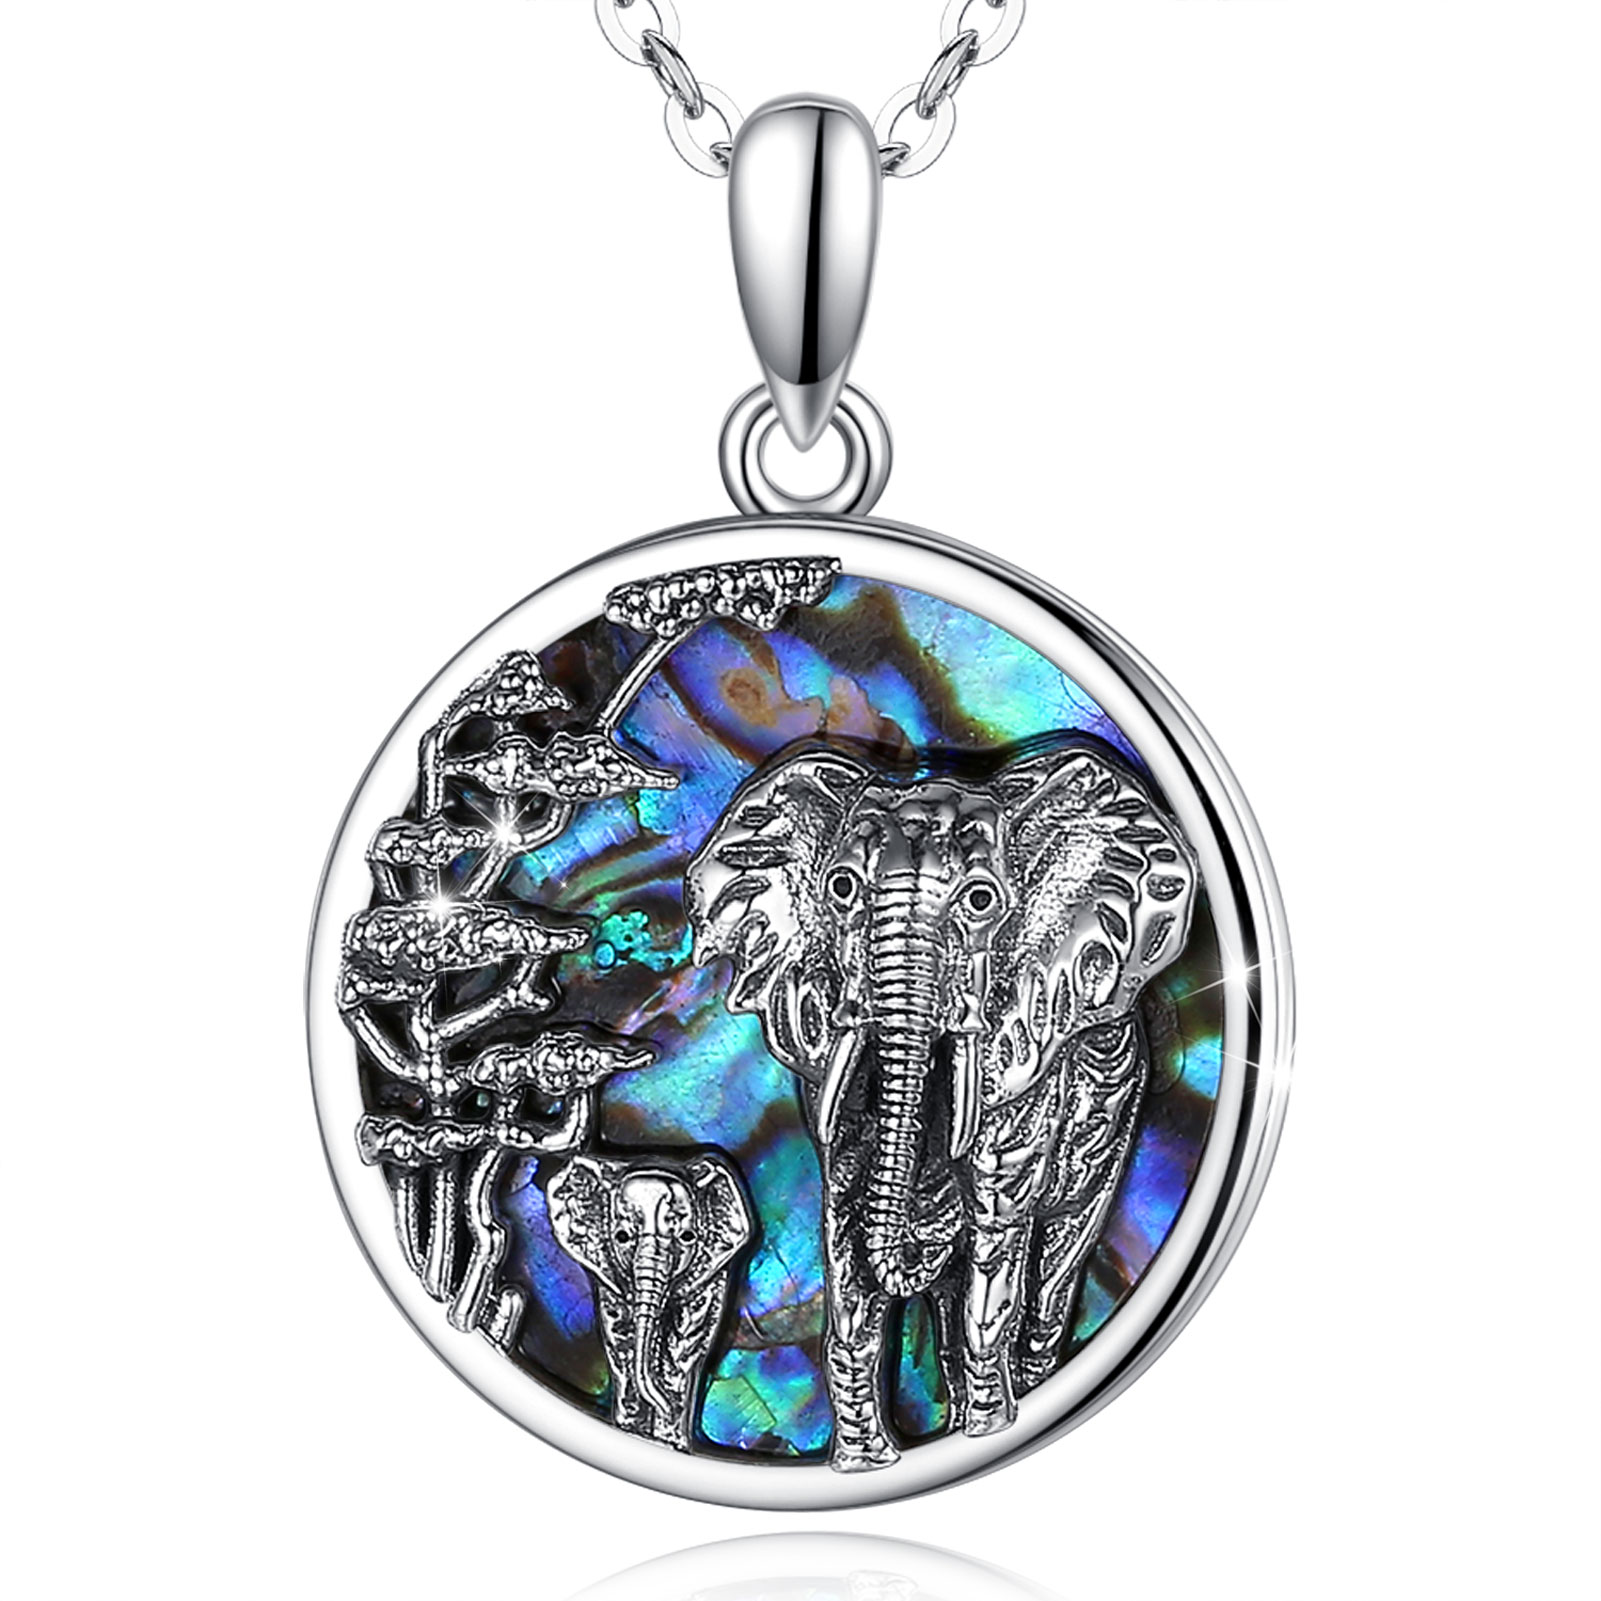 Merryshine Jewelry S925 Sterling Silver Abalone shell Elephant Mother Baby Animal Pendant Necklace